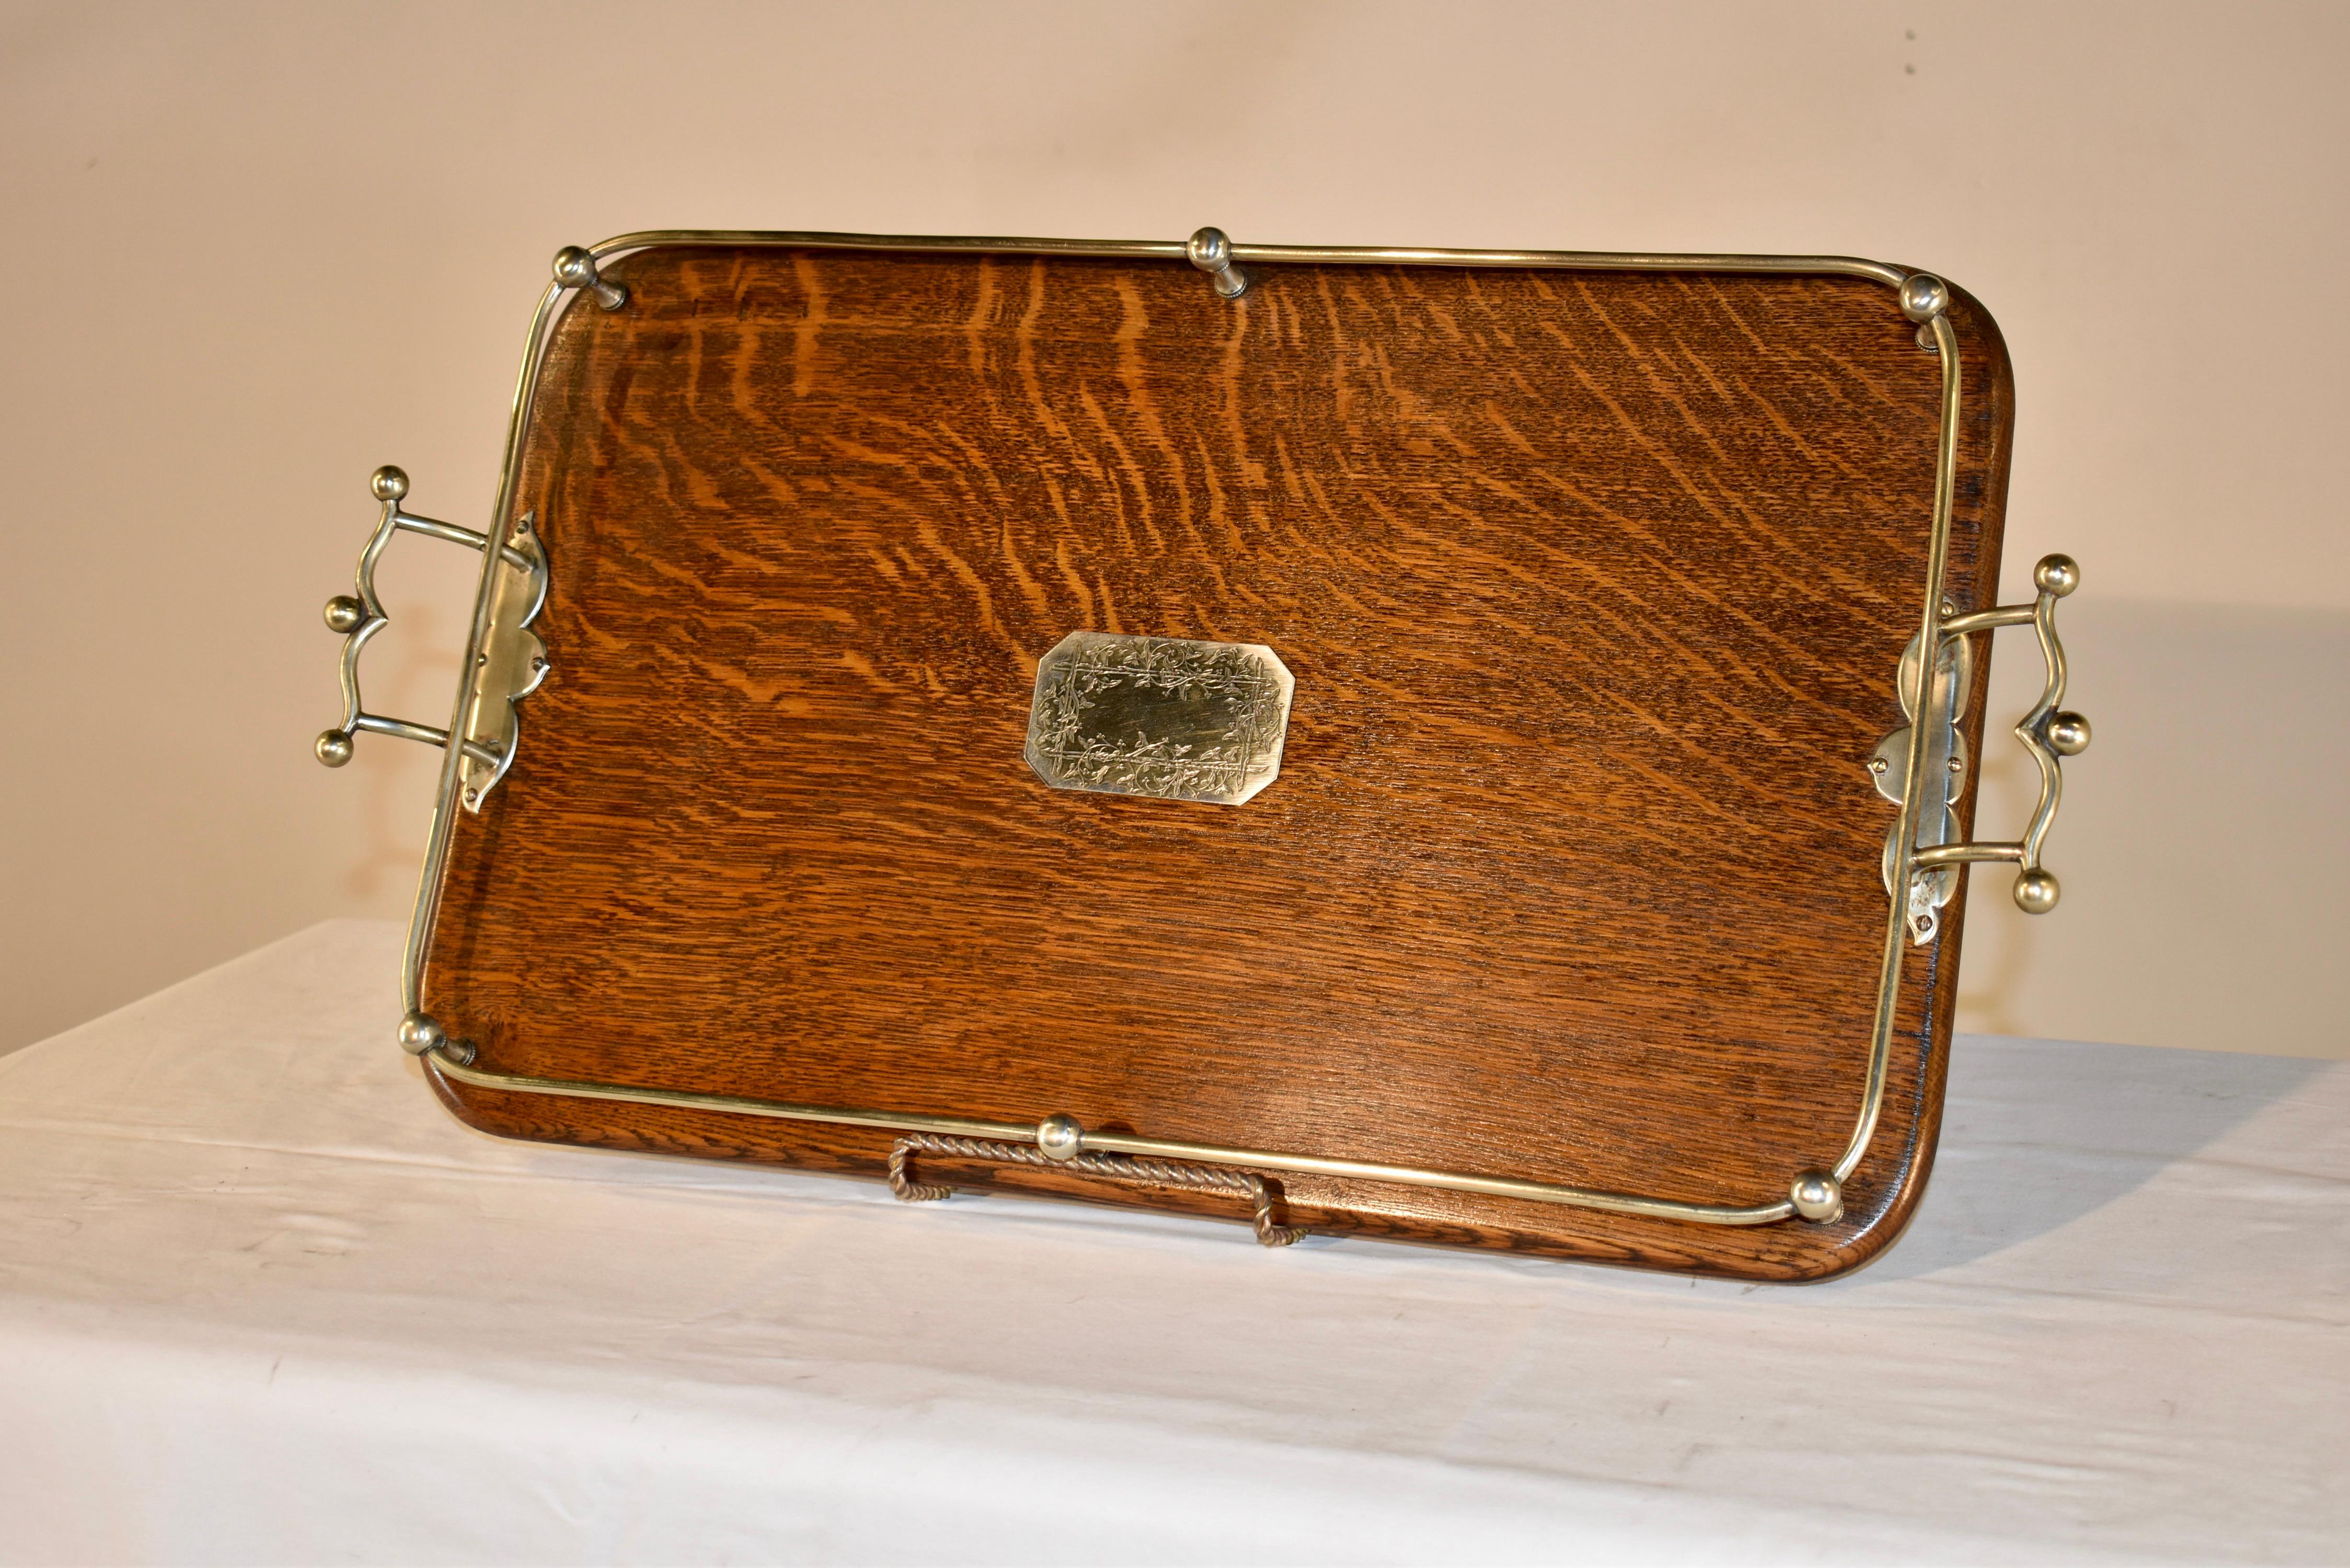 Edwardian Late 19th Century English Gallery Tray For Sale